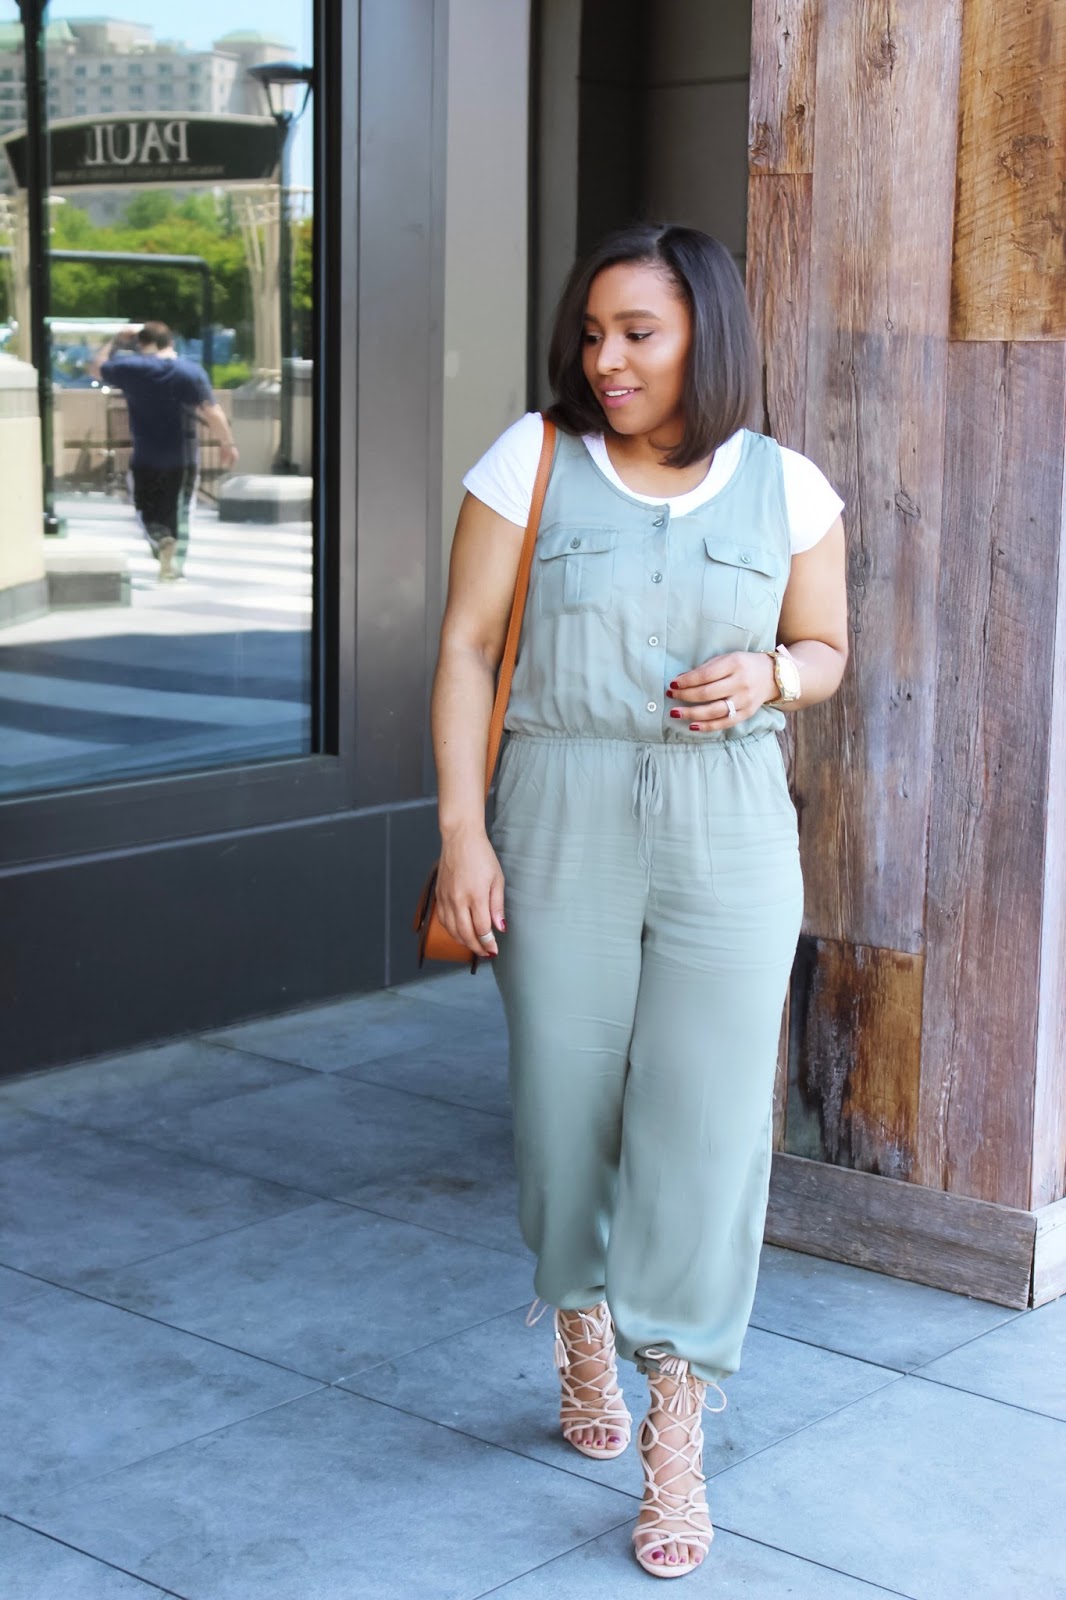 17 jumpsuits and rompers on  under $40 - TODAY